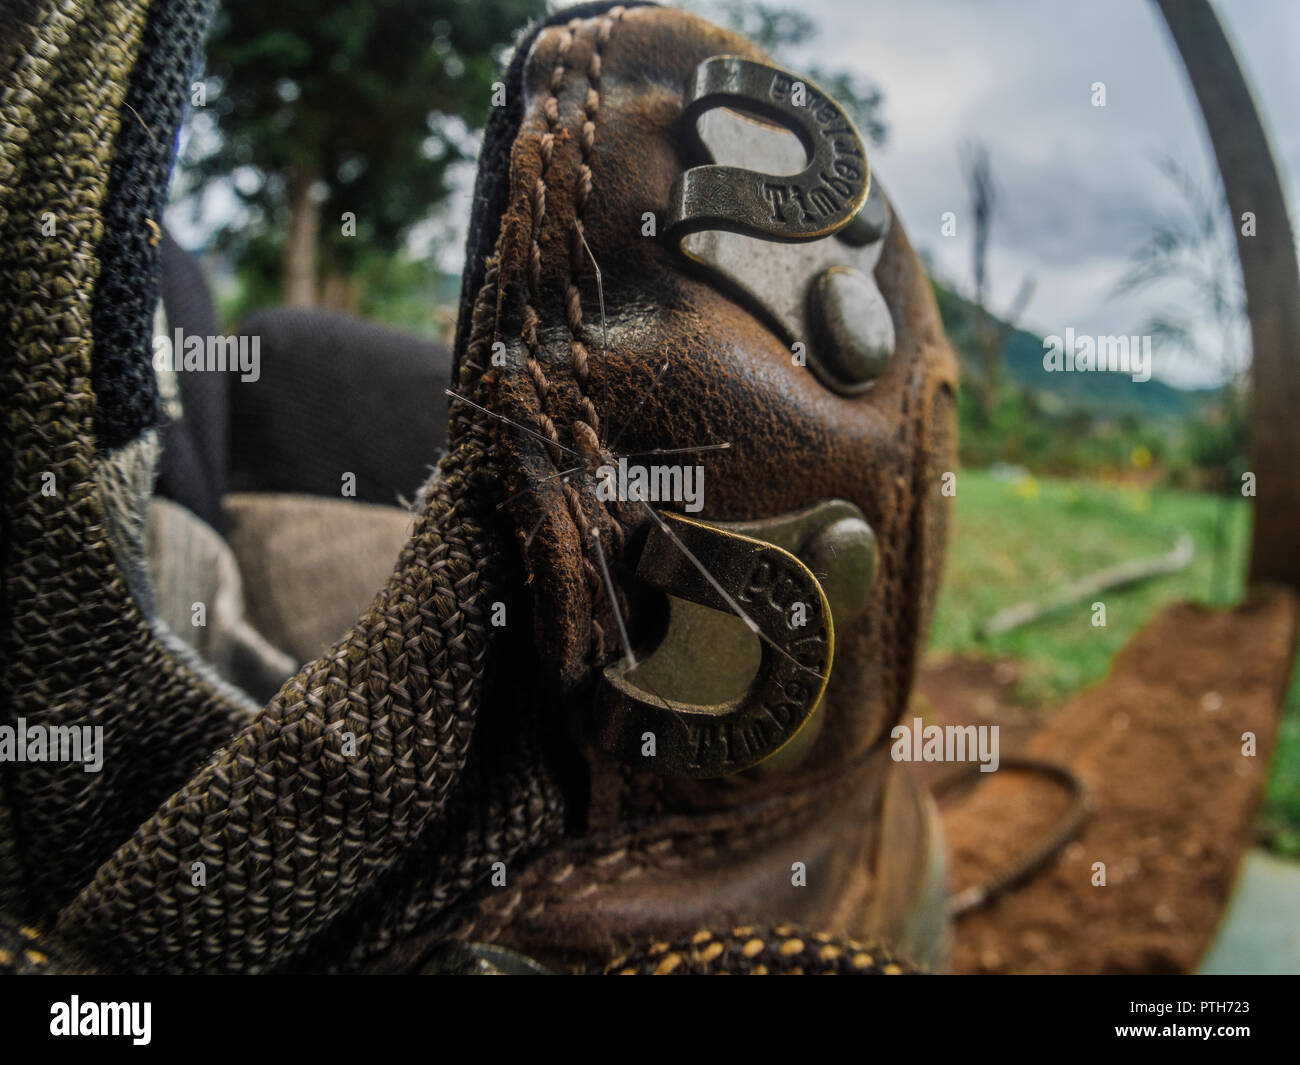 Wide macro of a daddy long legs (Pholcidae) spider exiting a hiking boot, shows it's a good practice to shake shoes for spiders. Stock Photo